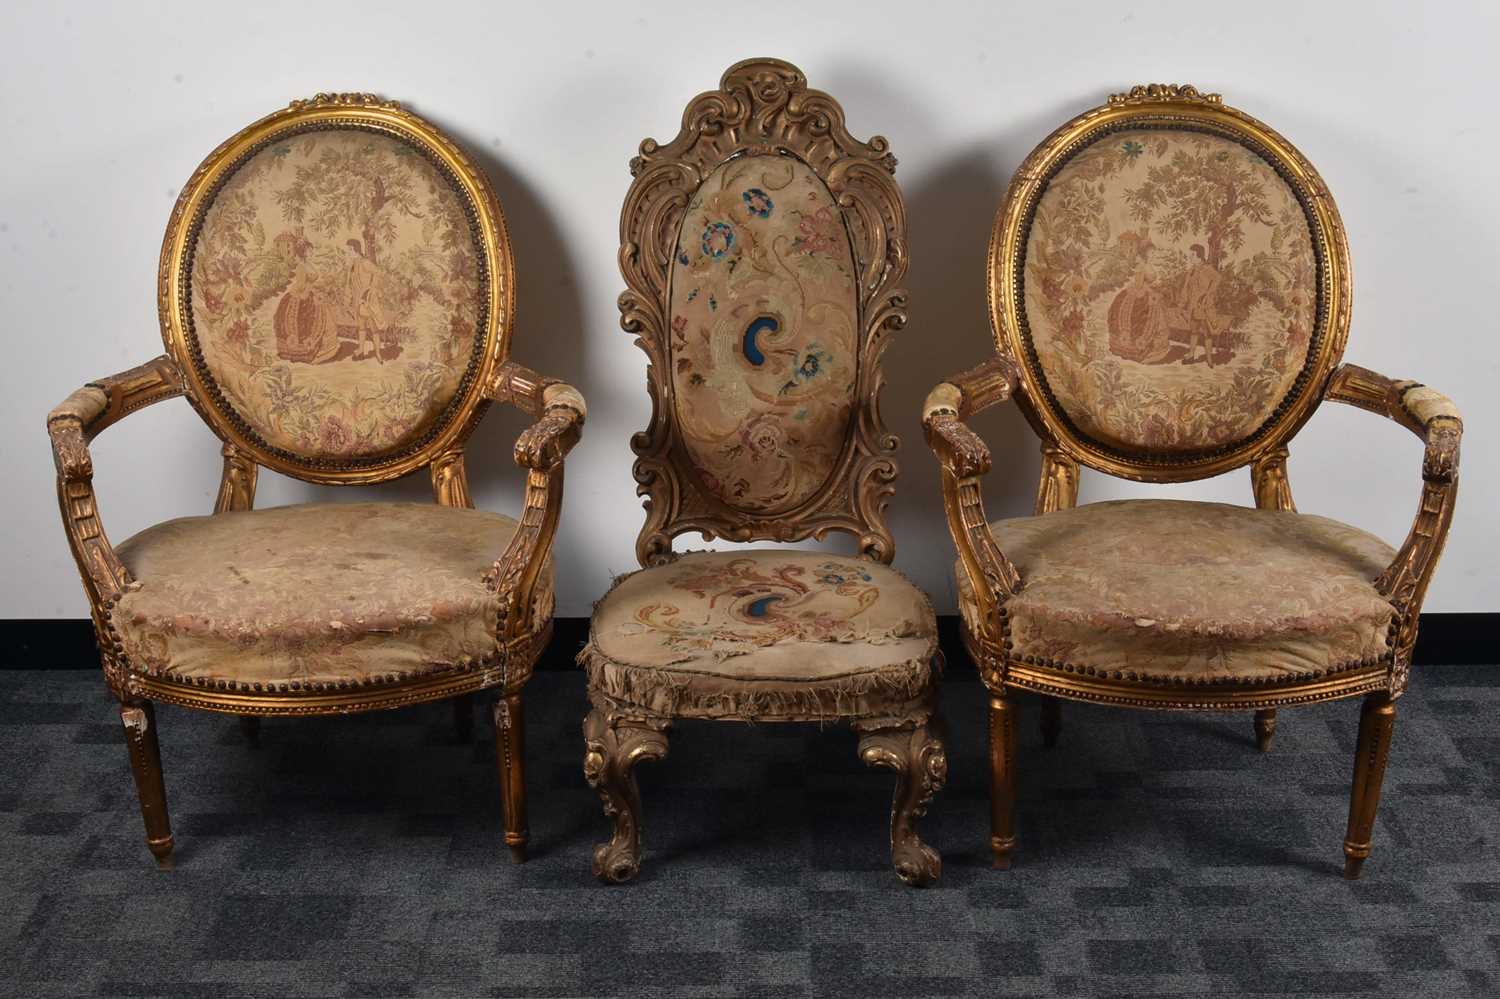 French Gilt Arm chairs x 2 and 1 bedroom french gilt chair. Town and country antiques